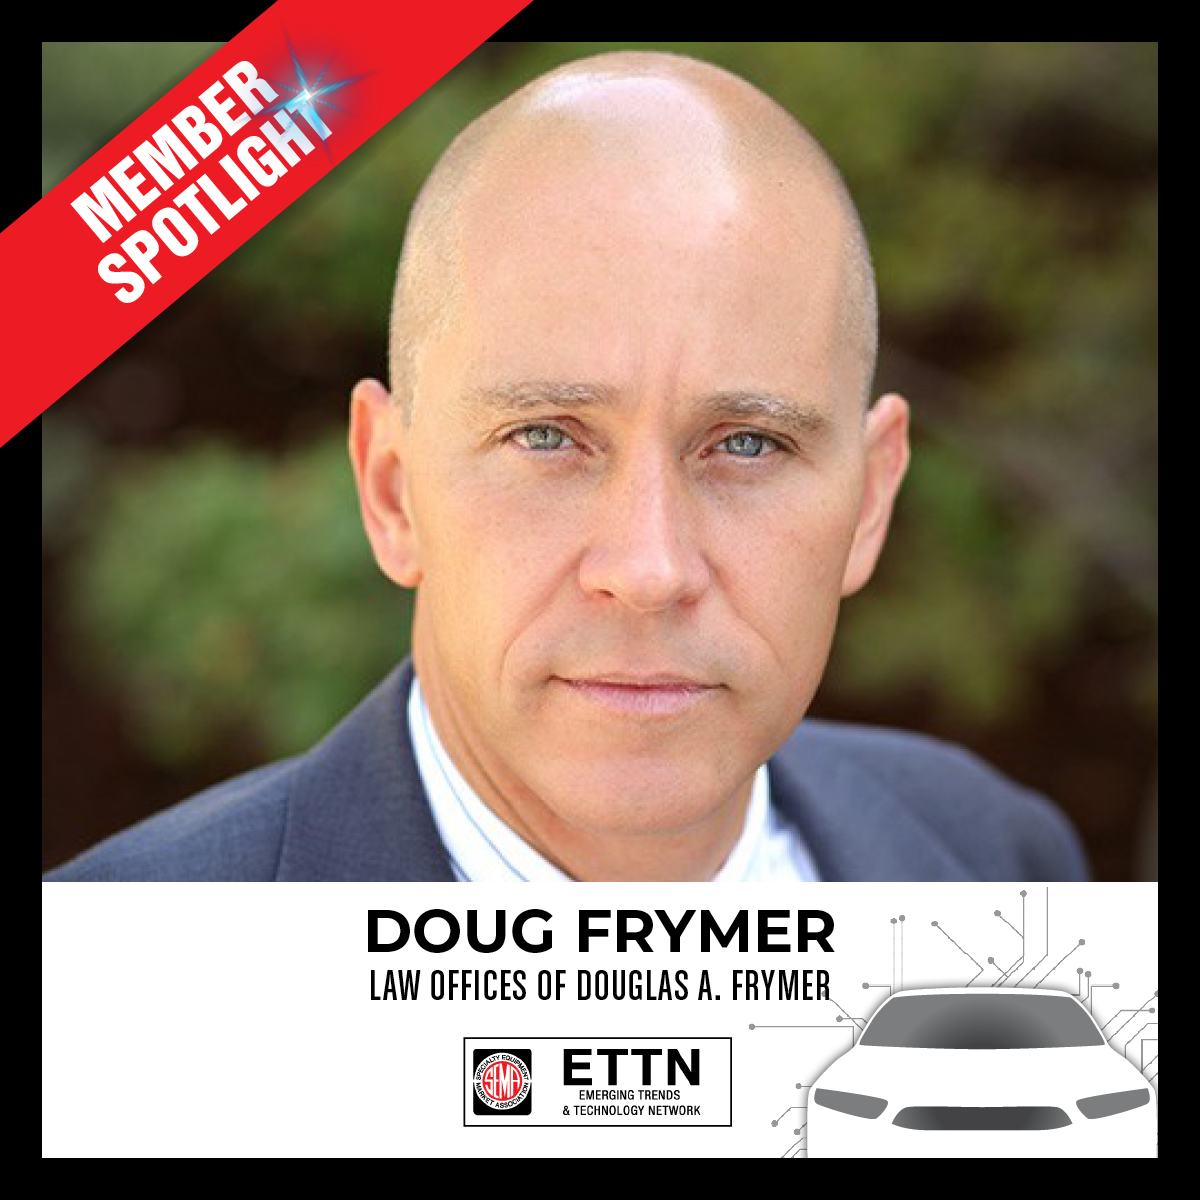 ETTN - Douglas A. Frymer, Attorney at Law Offices